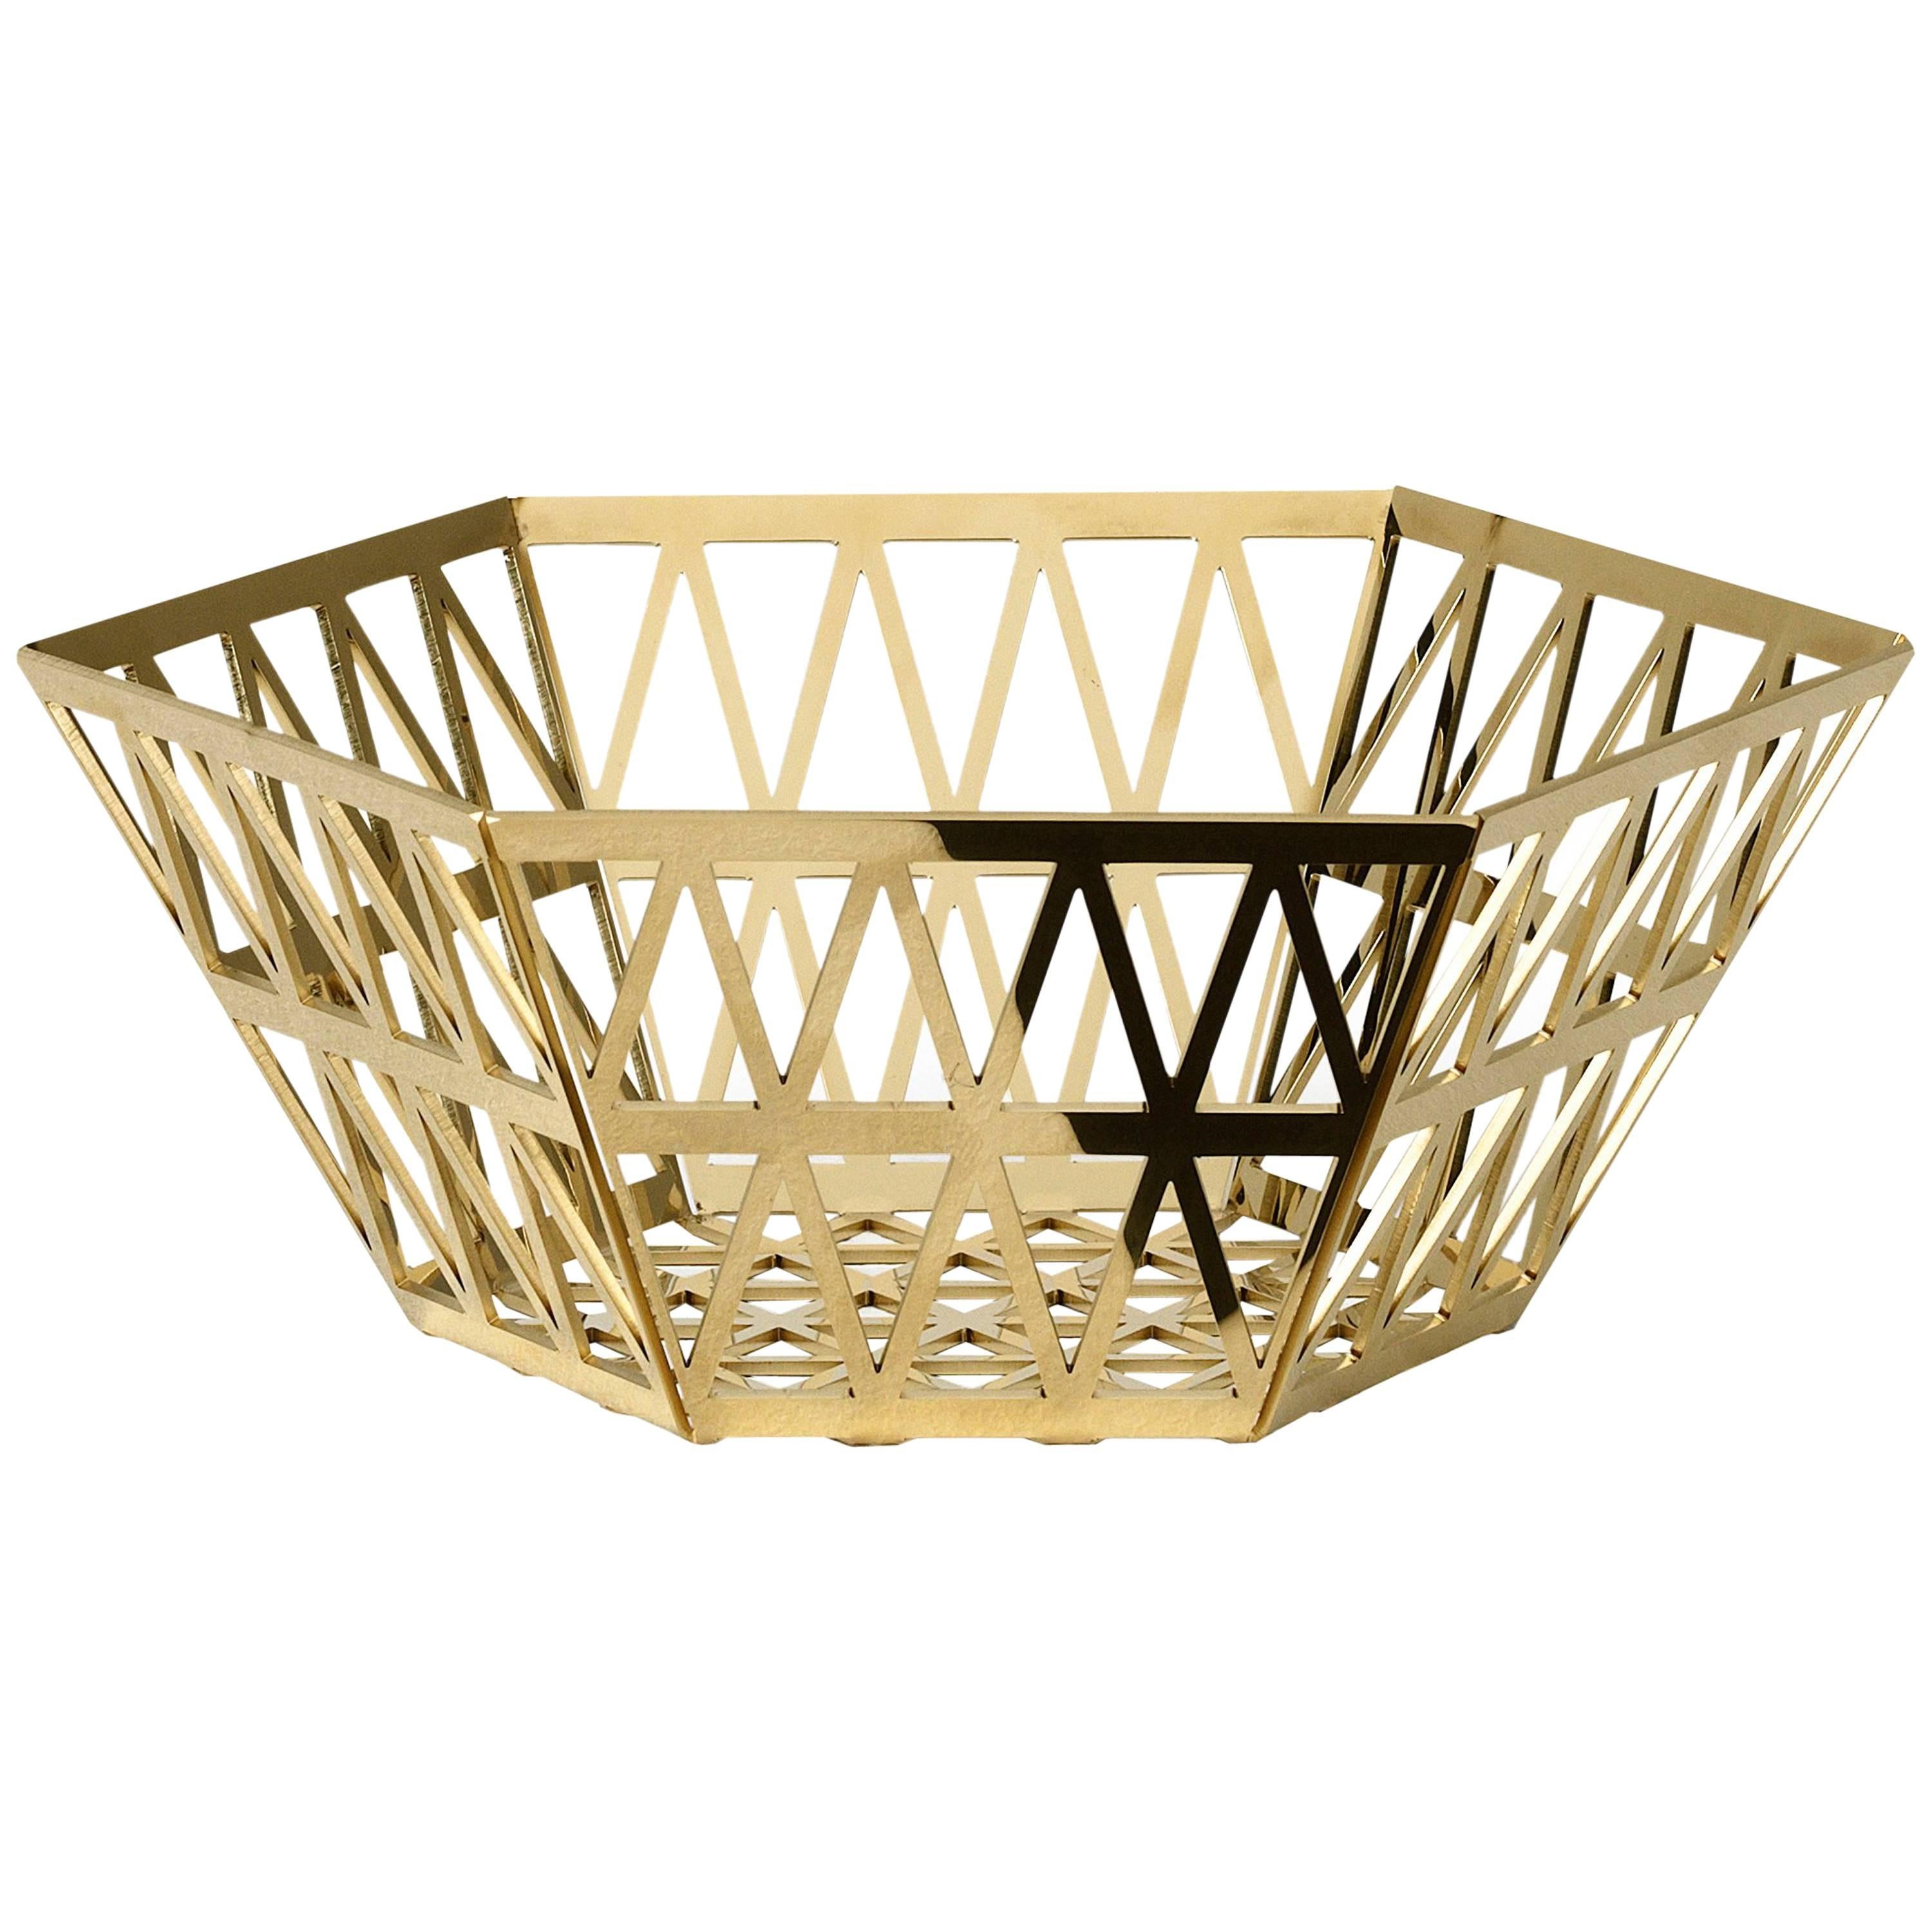 Ghidini 1961 Tip Top Tall Tray in Polished Gold Finish